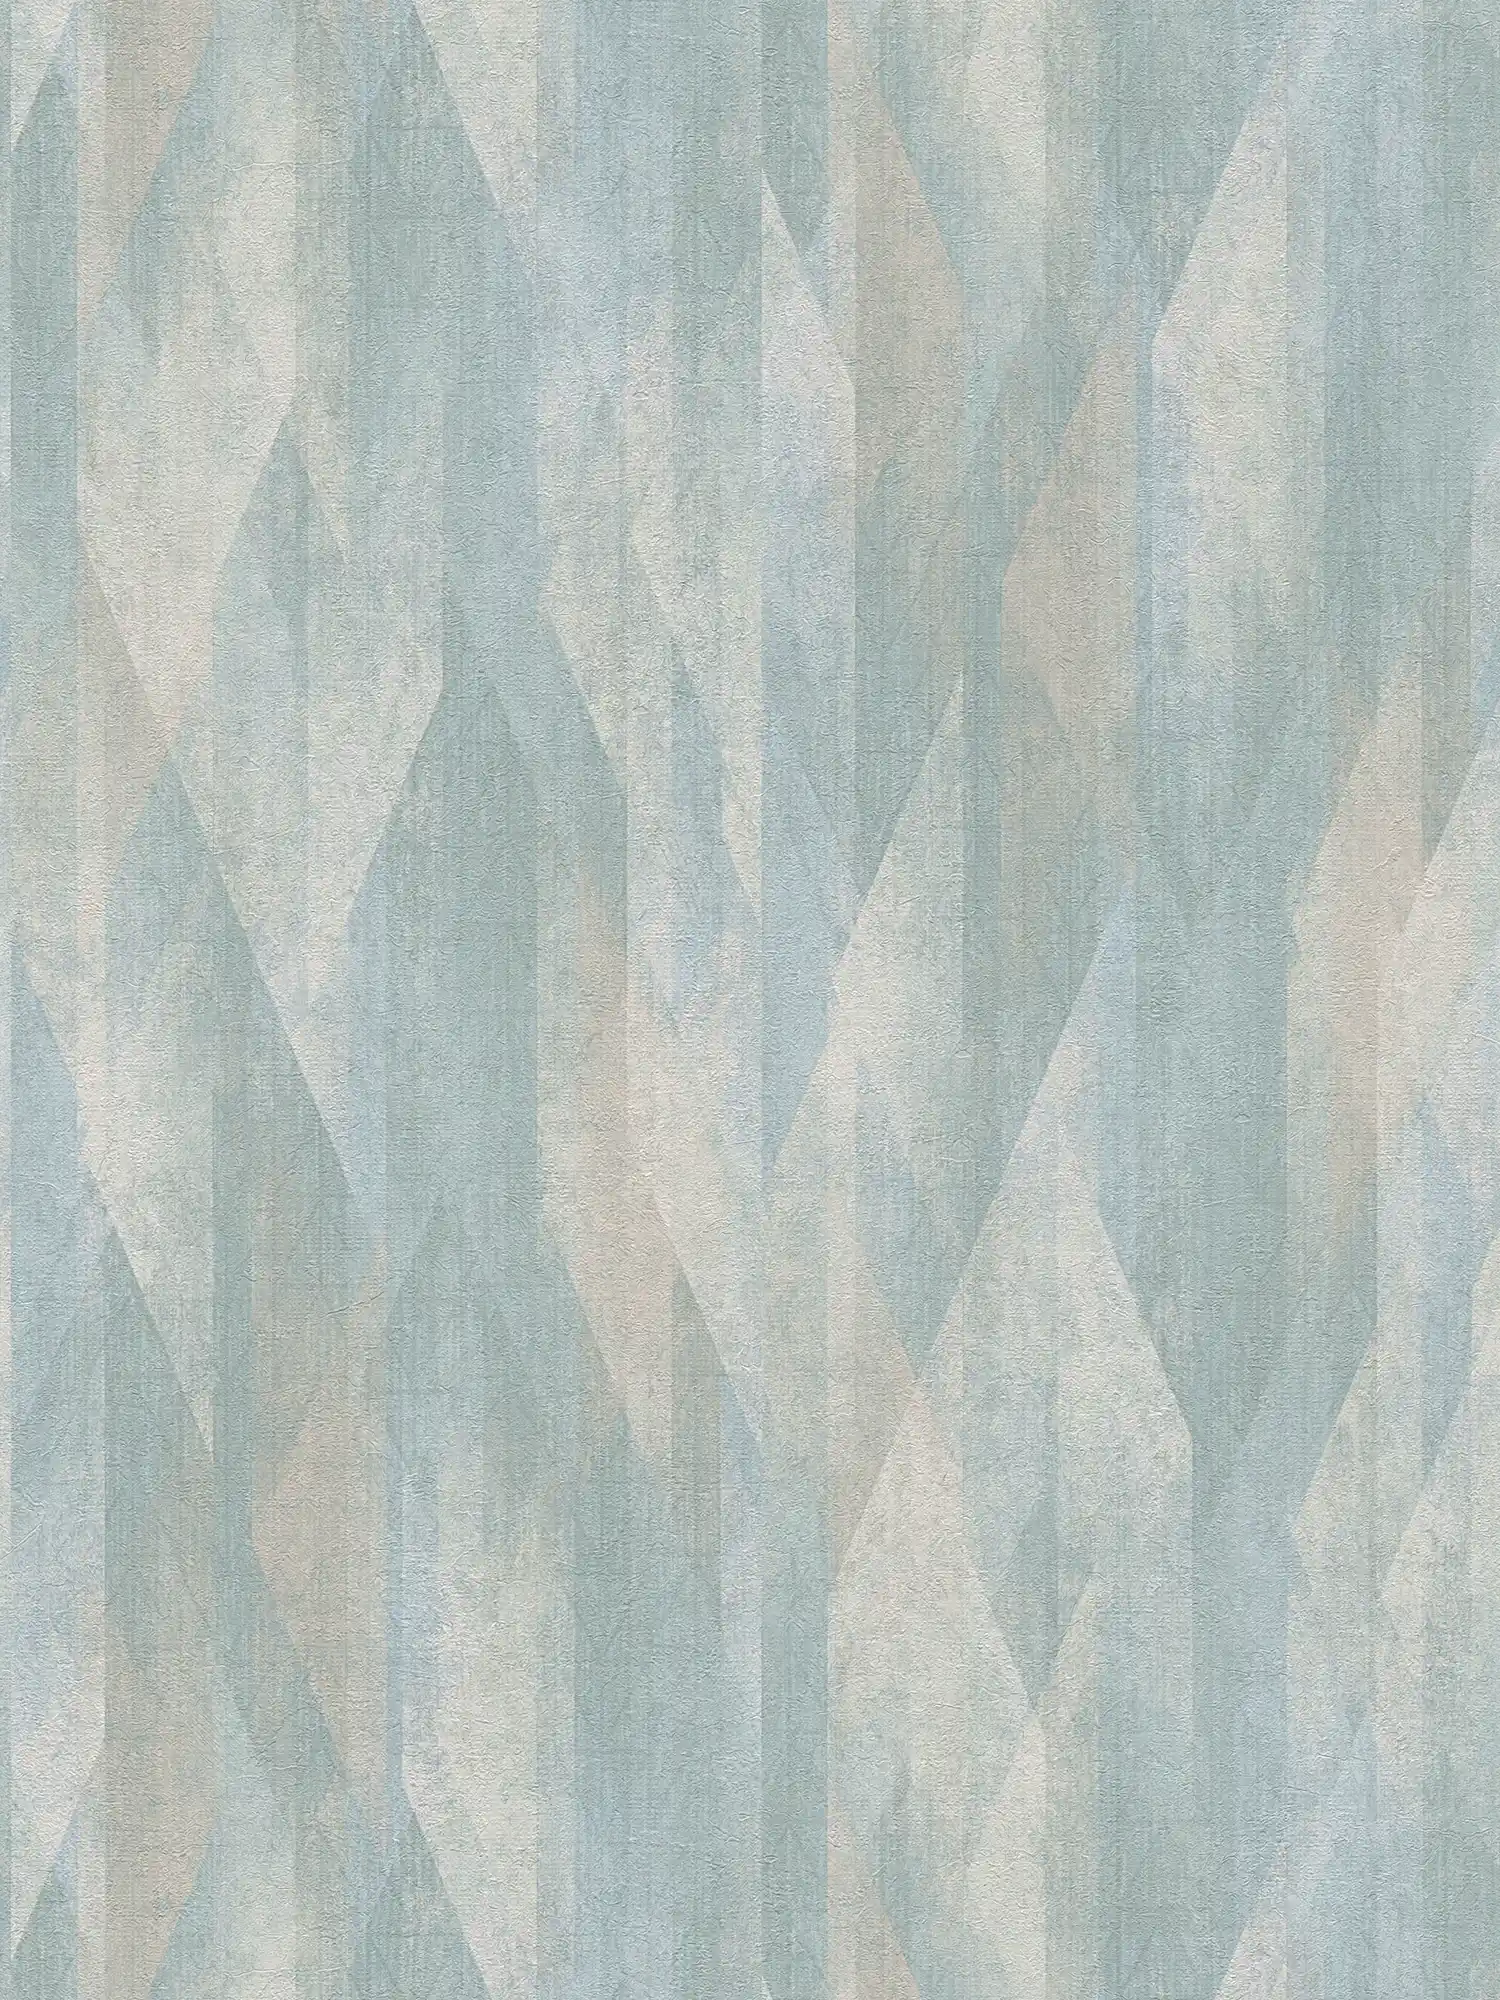 Pattern wallpaper with graphic lozenges - turquoise, blue, cream
